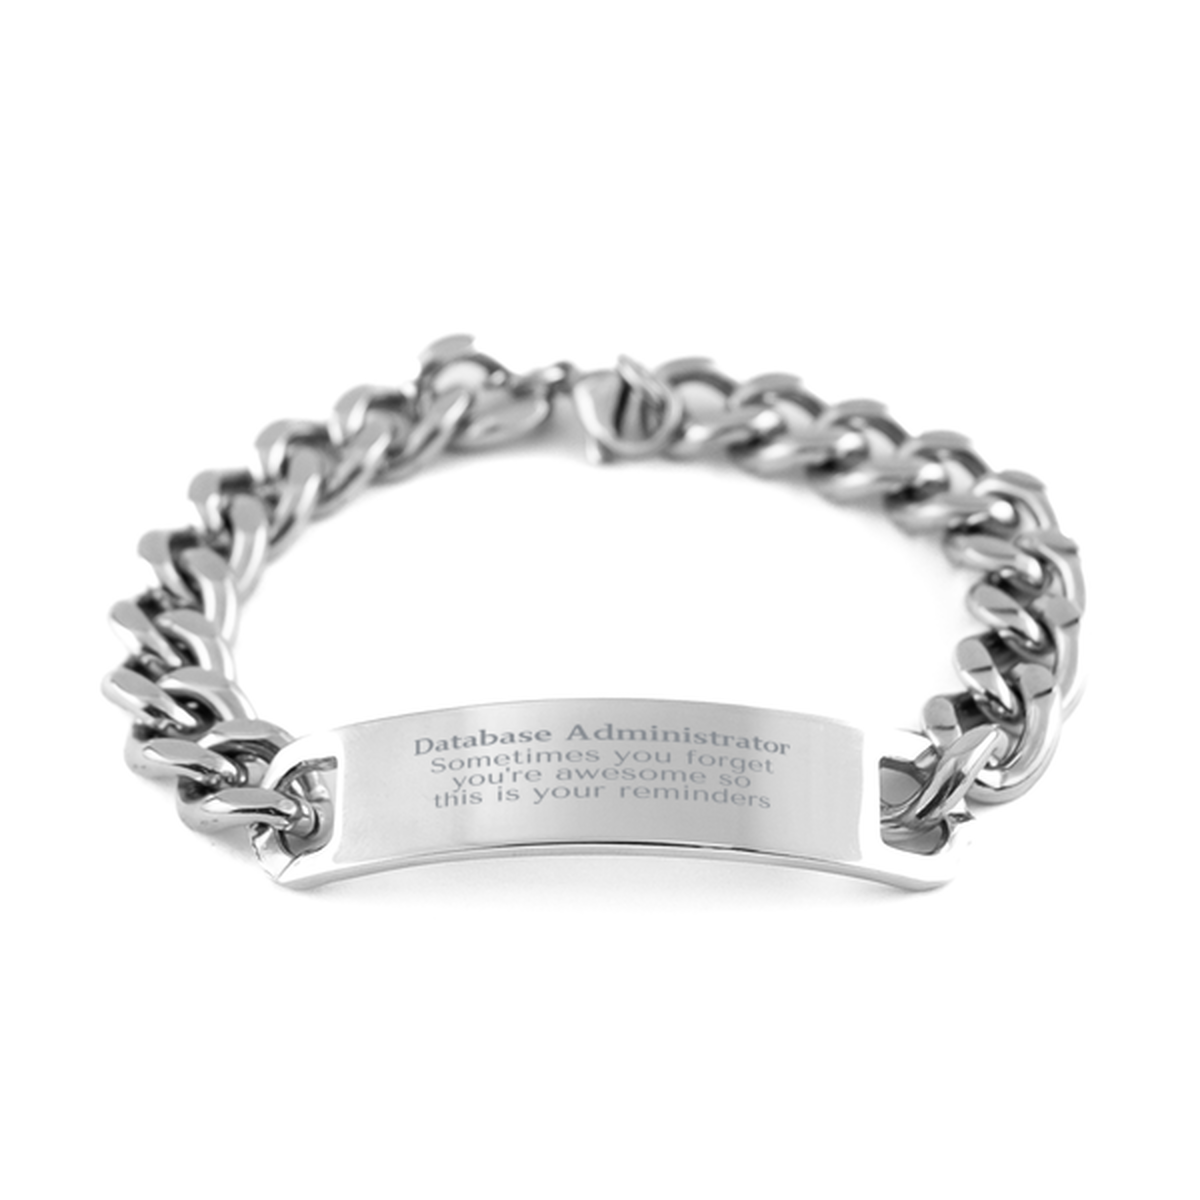 Sentimental Database Administrator Cuban Chain Stainless Steel Bracelet, Database Administrator Sometimes you forget you're awesome so this is your reminders, Graduation Christmas Birthday Gifts for Database Administrator, Men, Women, Coworkers